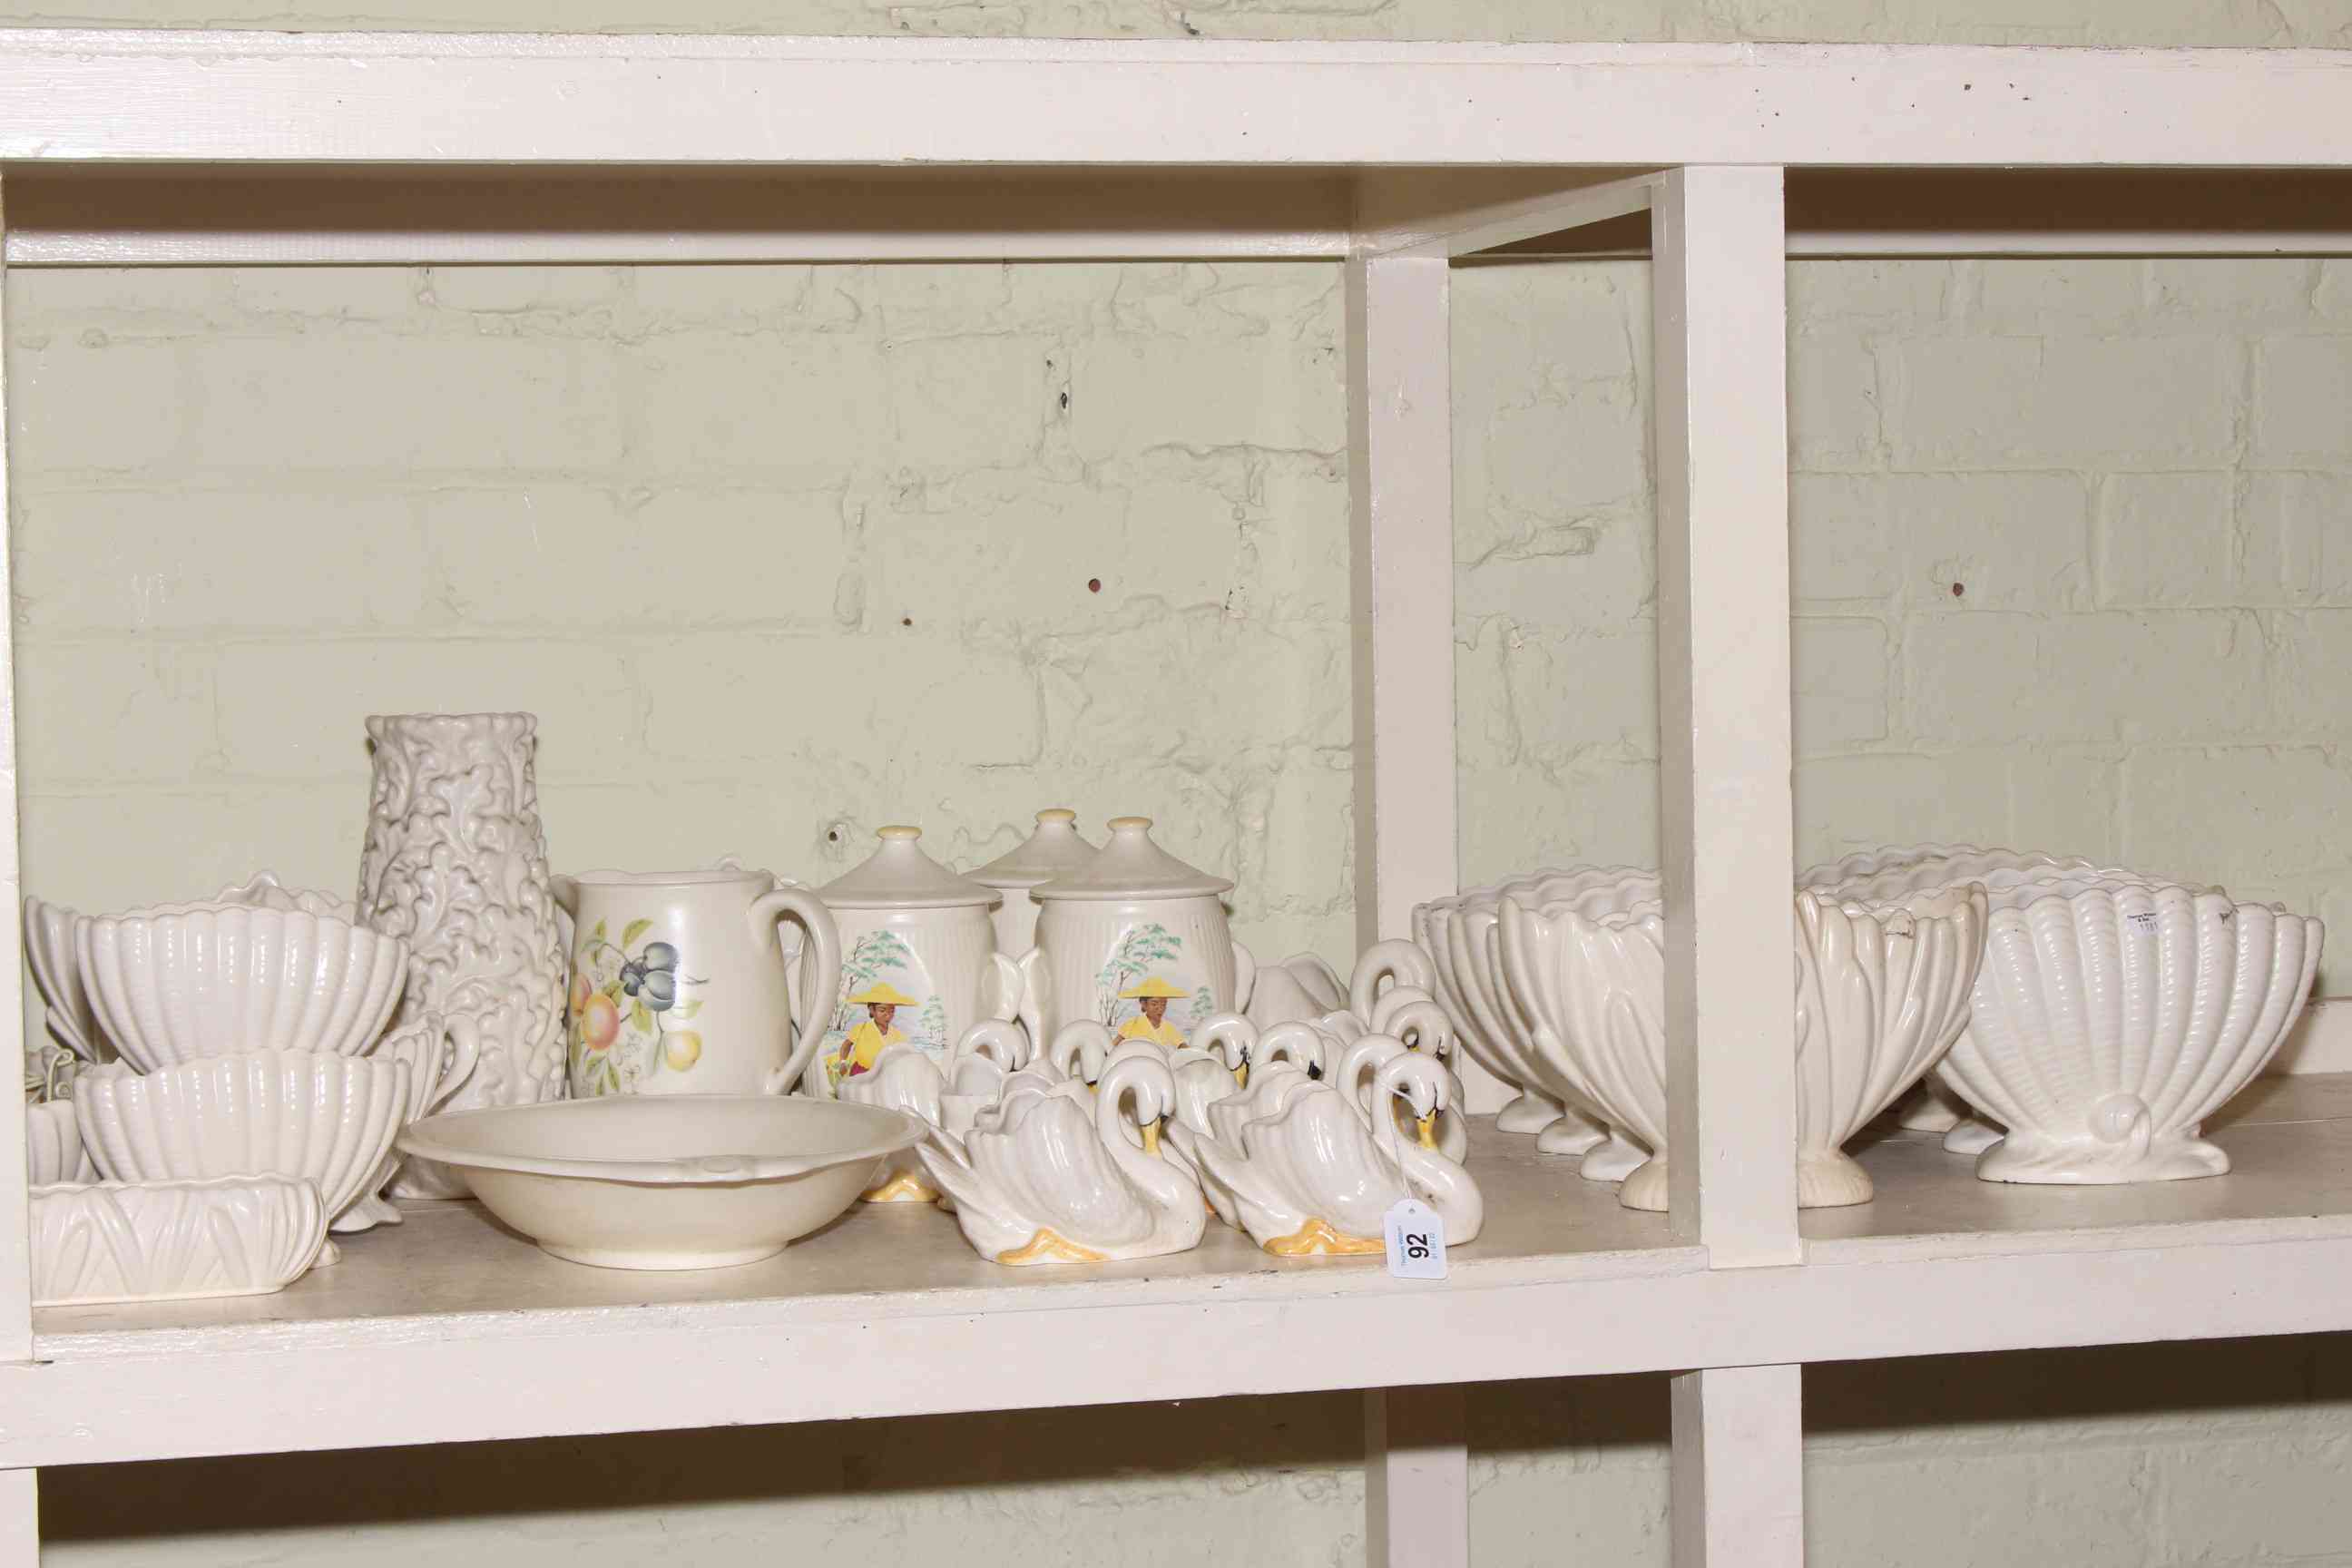 Large collection of white Sylvac Pottery including bulb bowls, vases, bulb bowls, - Image 2 of 3